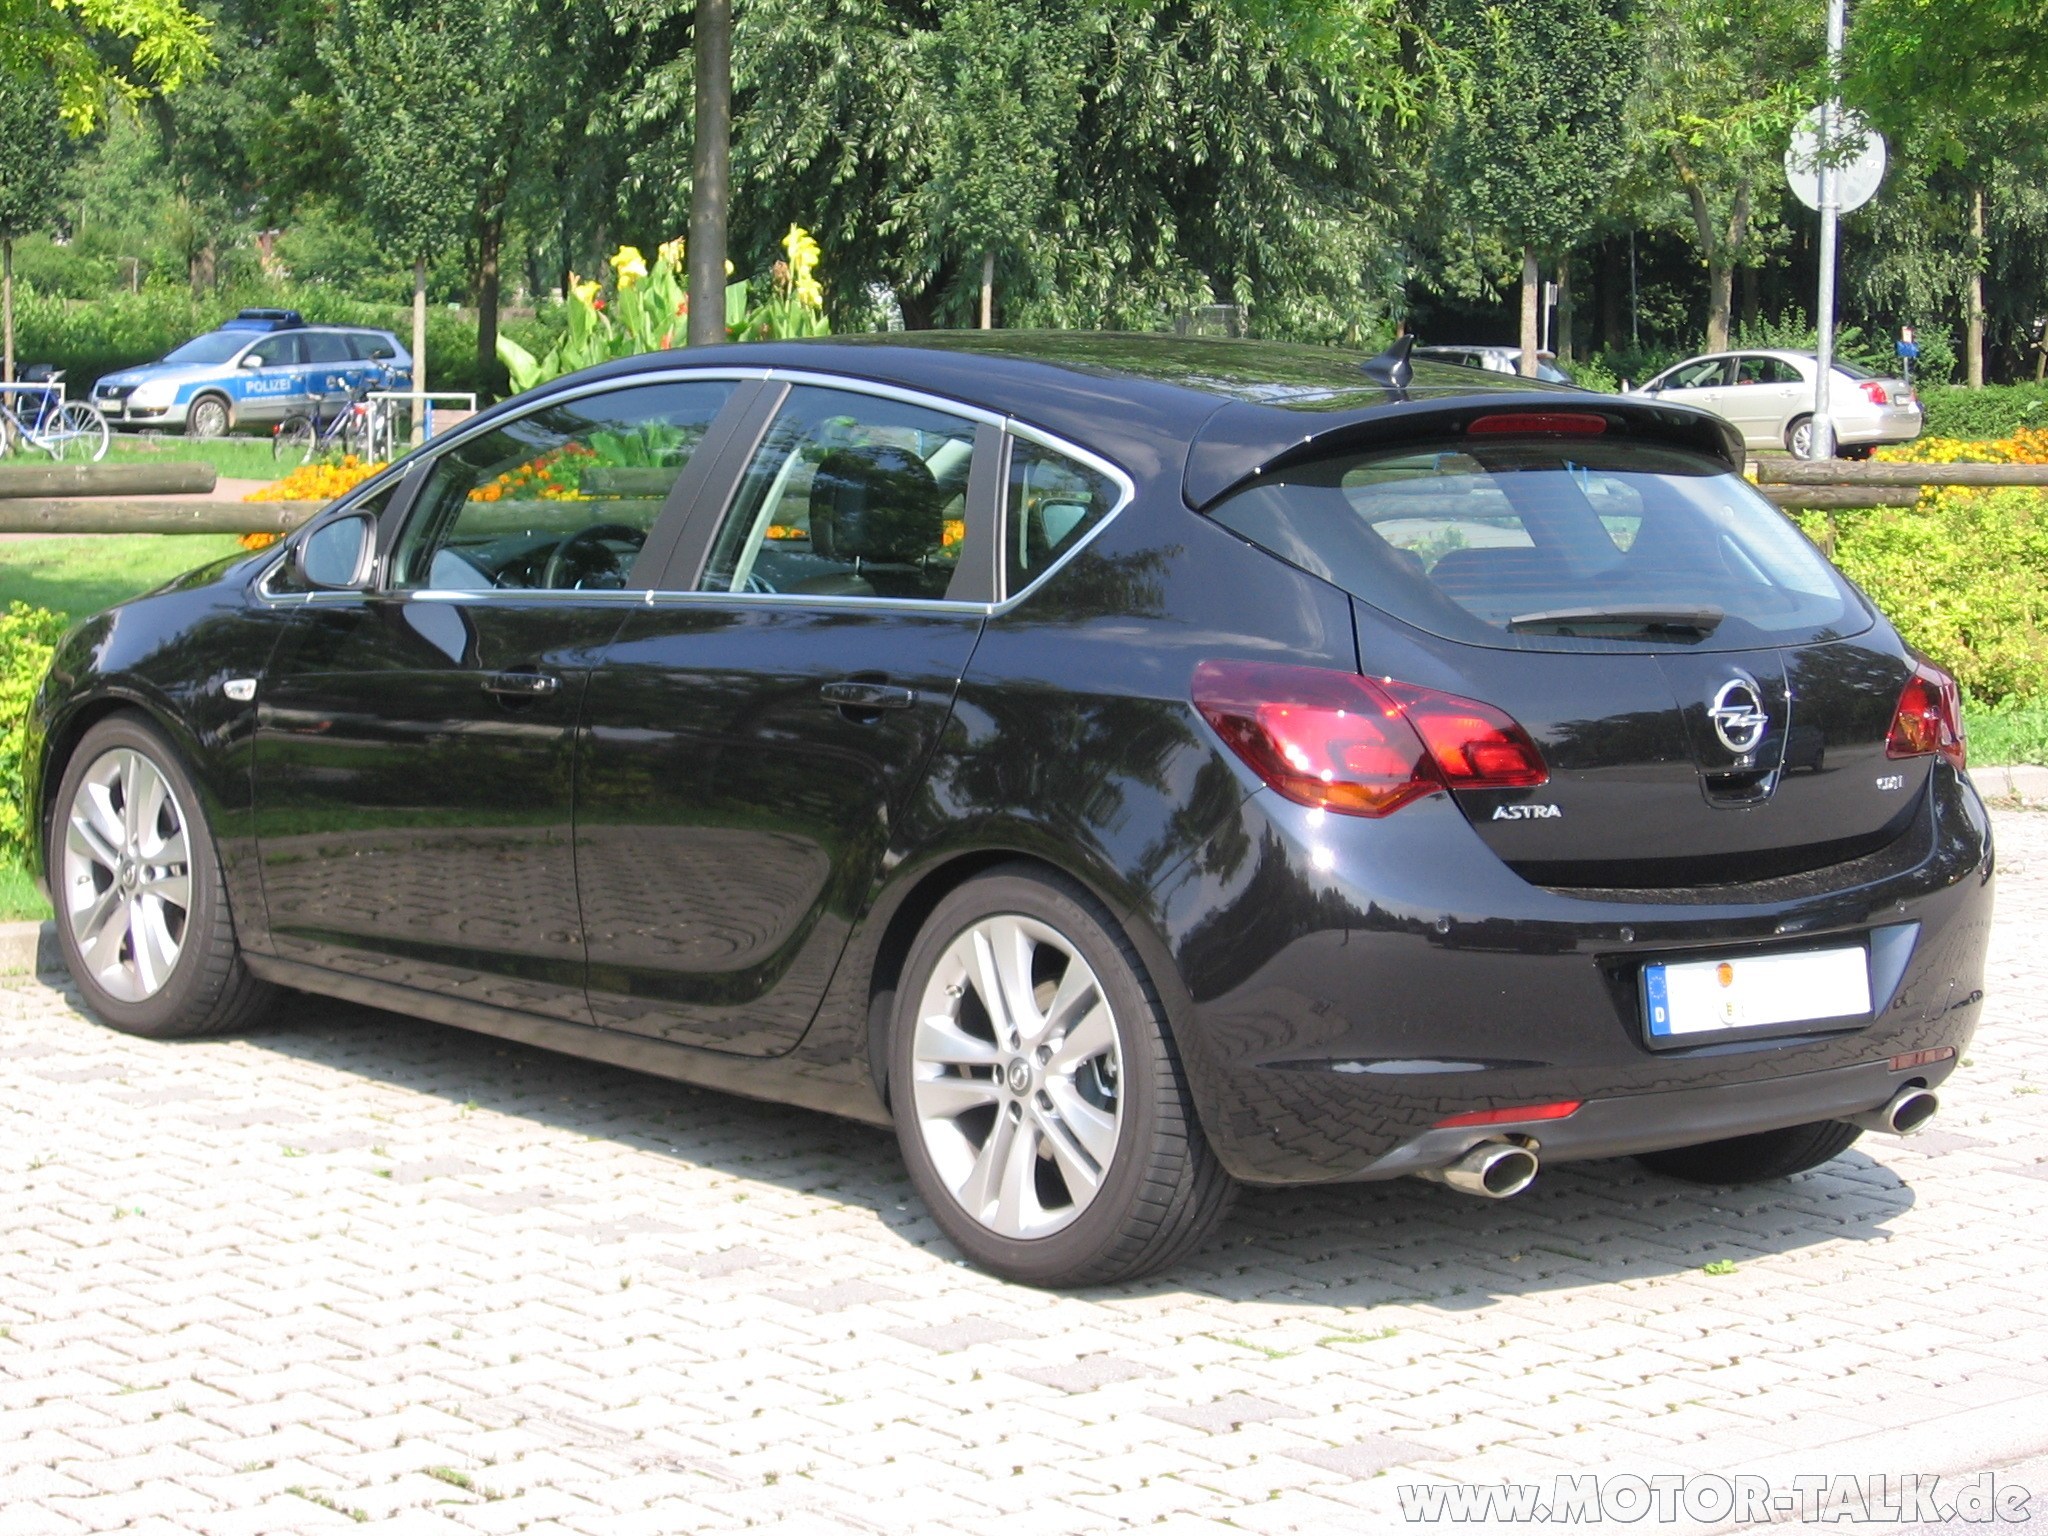 Opel Astra j ФСО. Opel Astra за 50000.